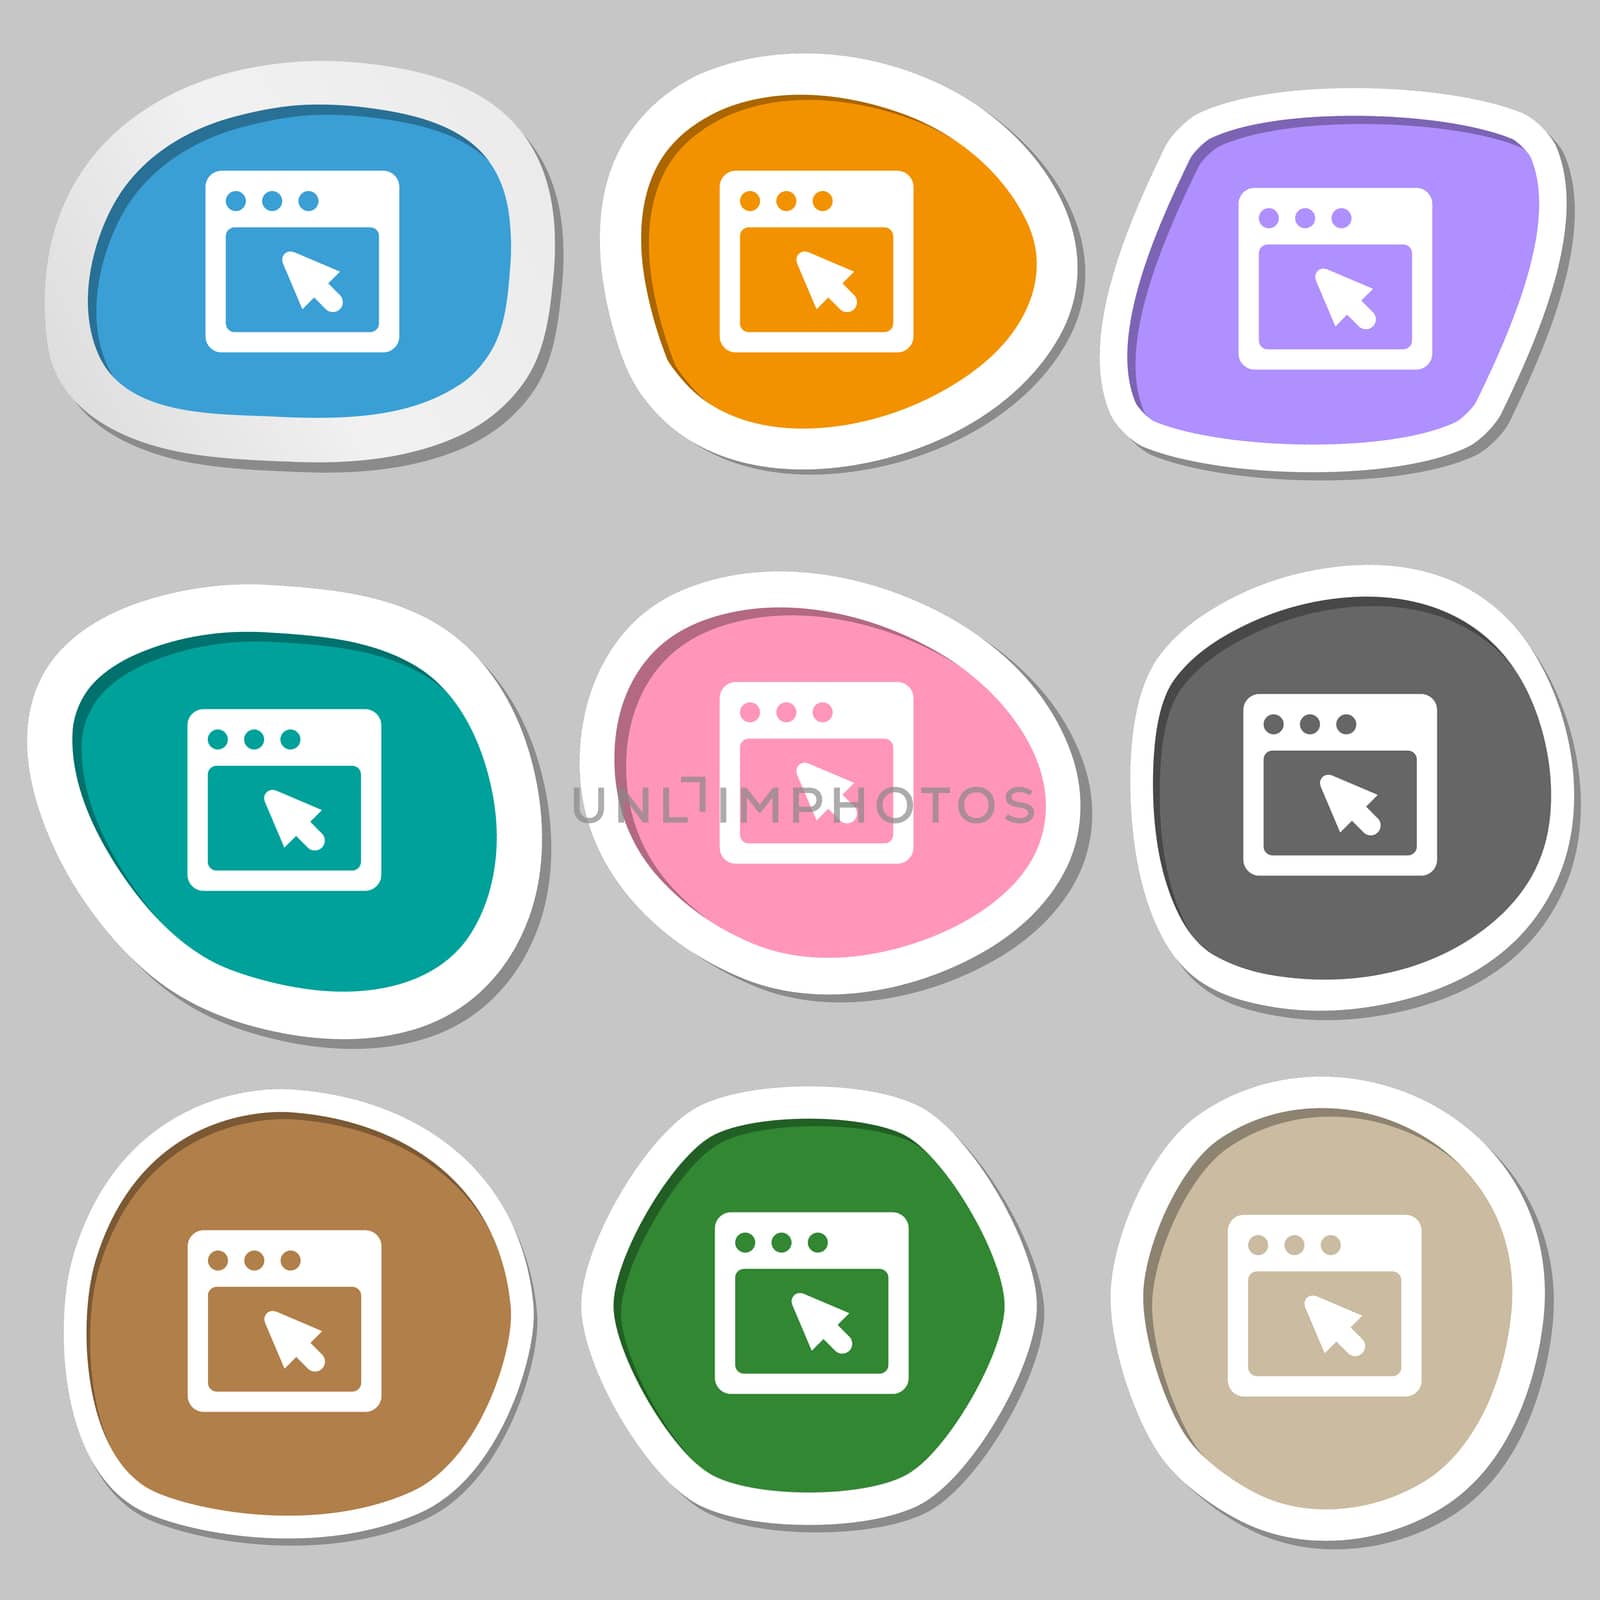 the dialog box icon symbols. Multicolored paper stickers.  by serhii_lohvyniuk